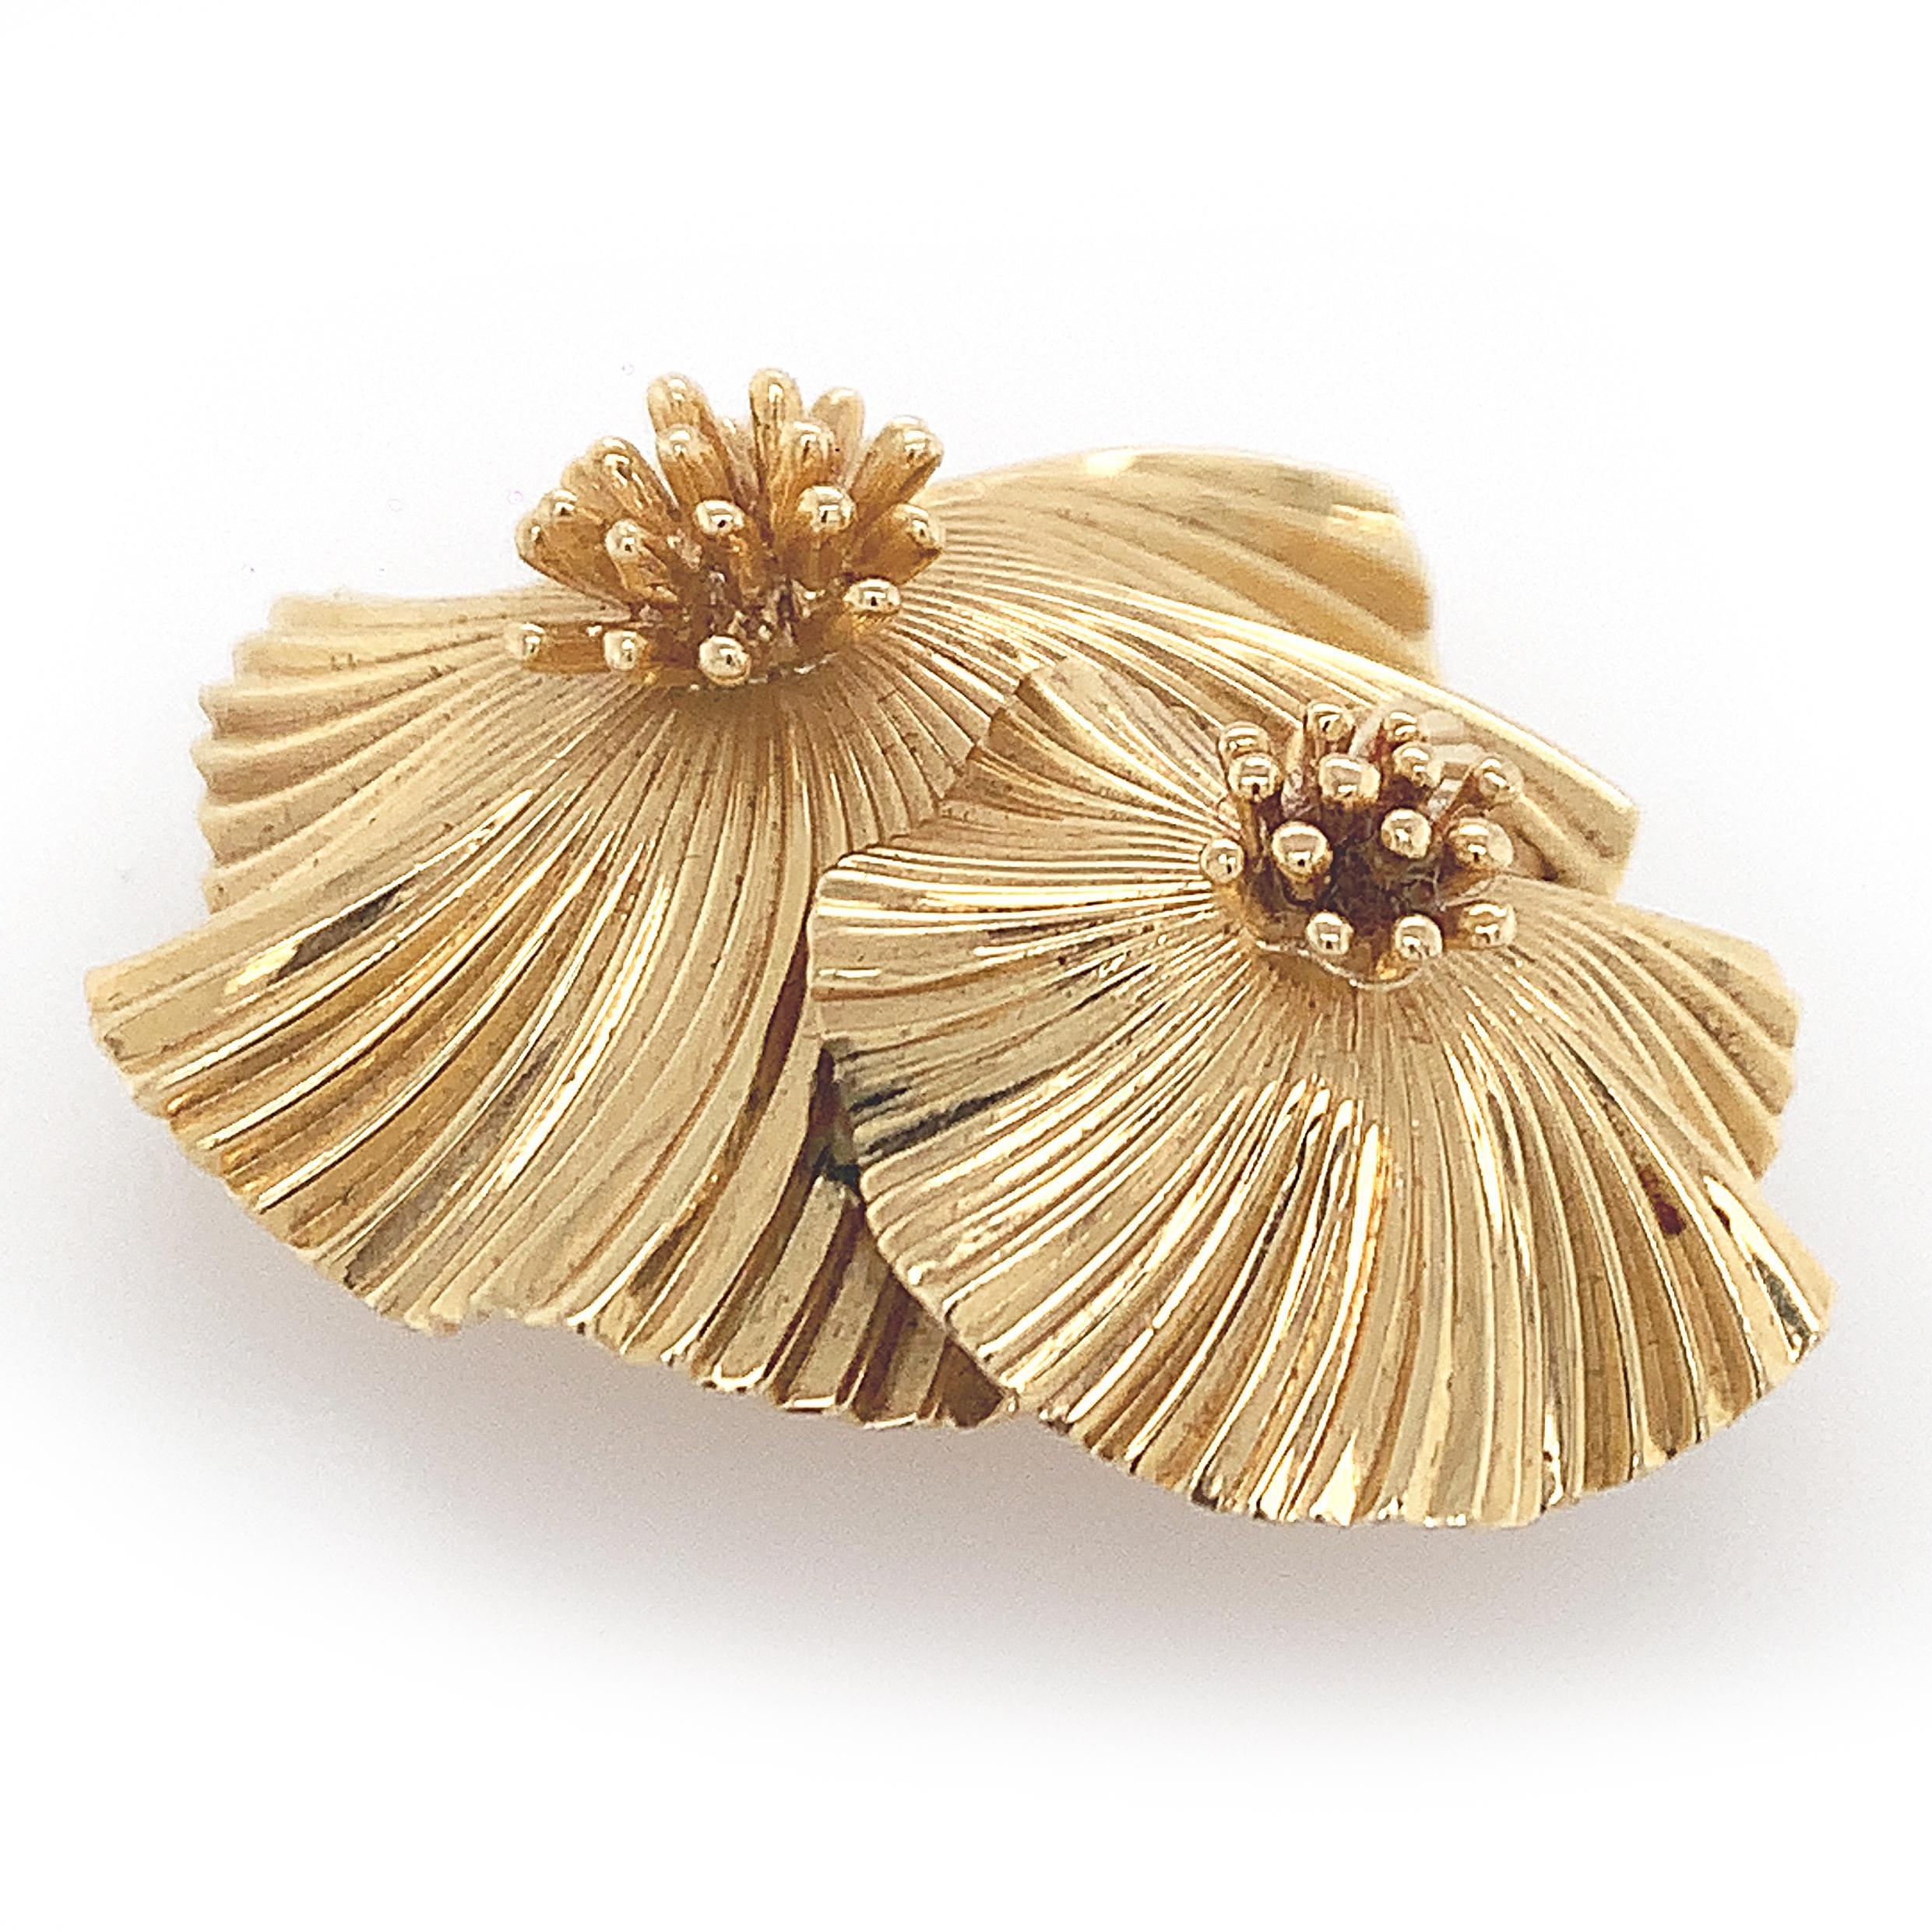 14K Y/gold fluted flower design pin, stamps CARTIER, measures 1 3/4 x 1 1/2 inch, weight 10 dwt.